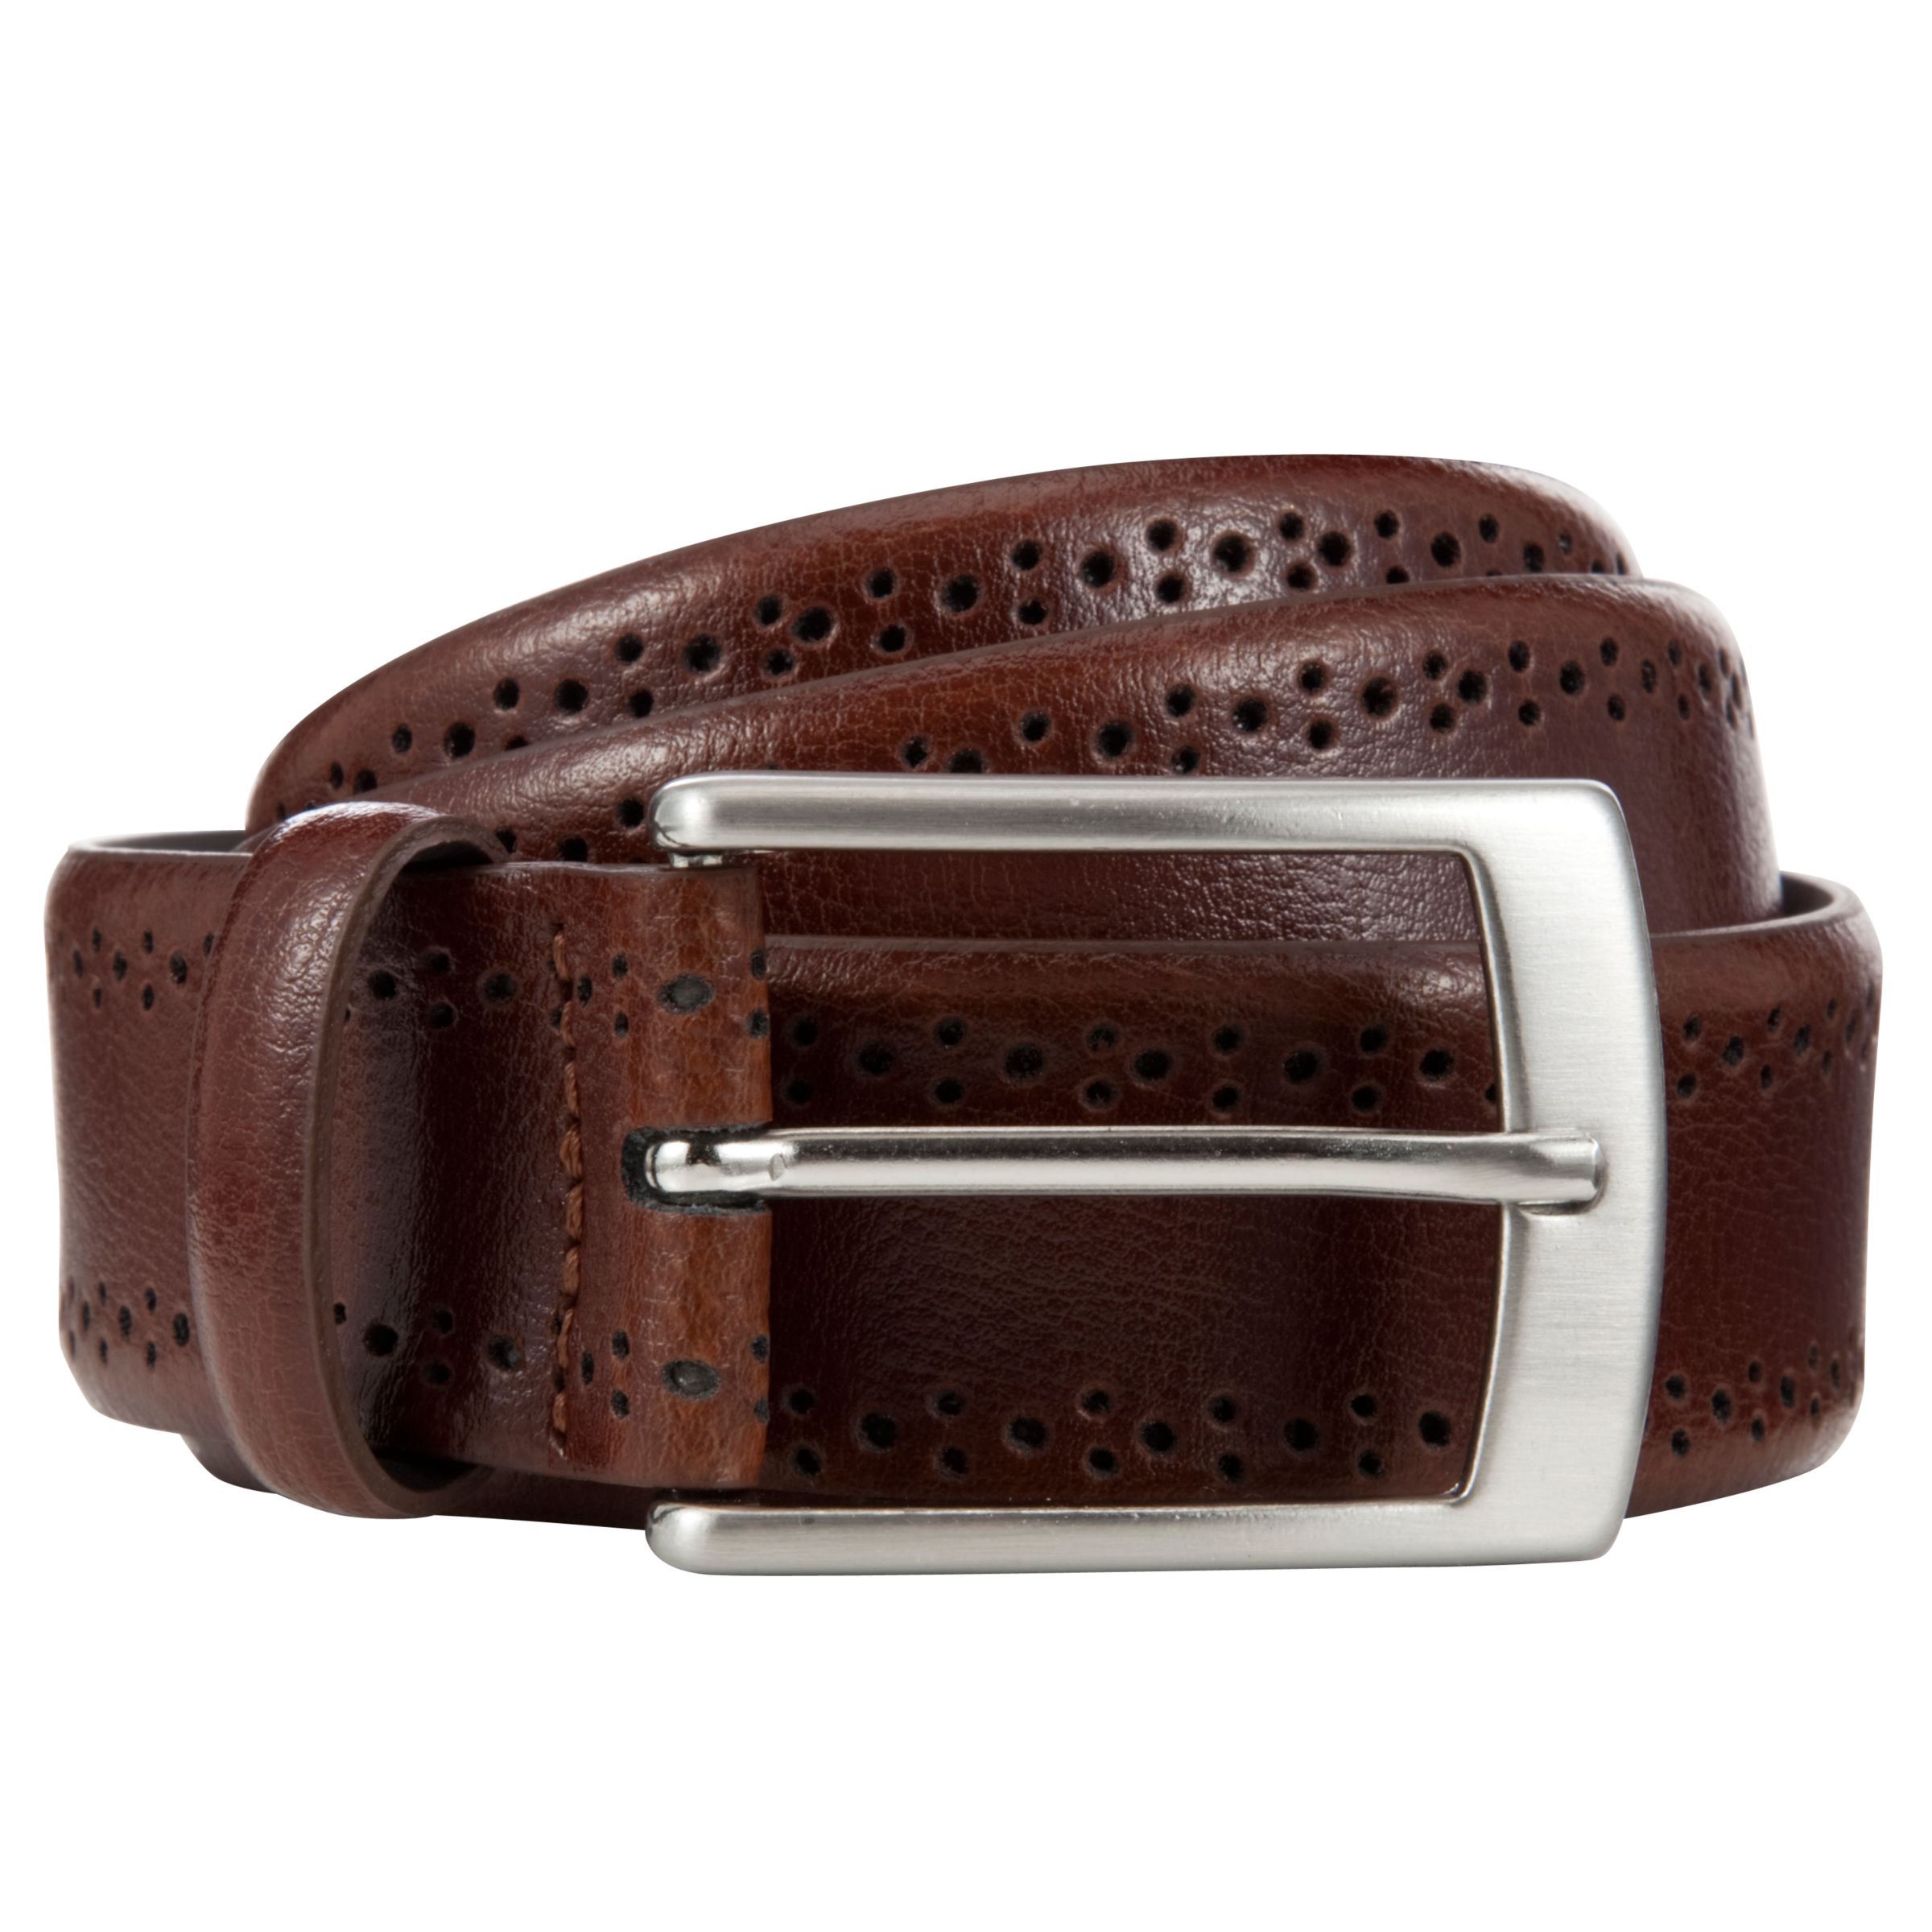 John Lewis & Partners Made In Italy Brogue Belt, Brown, L